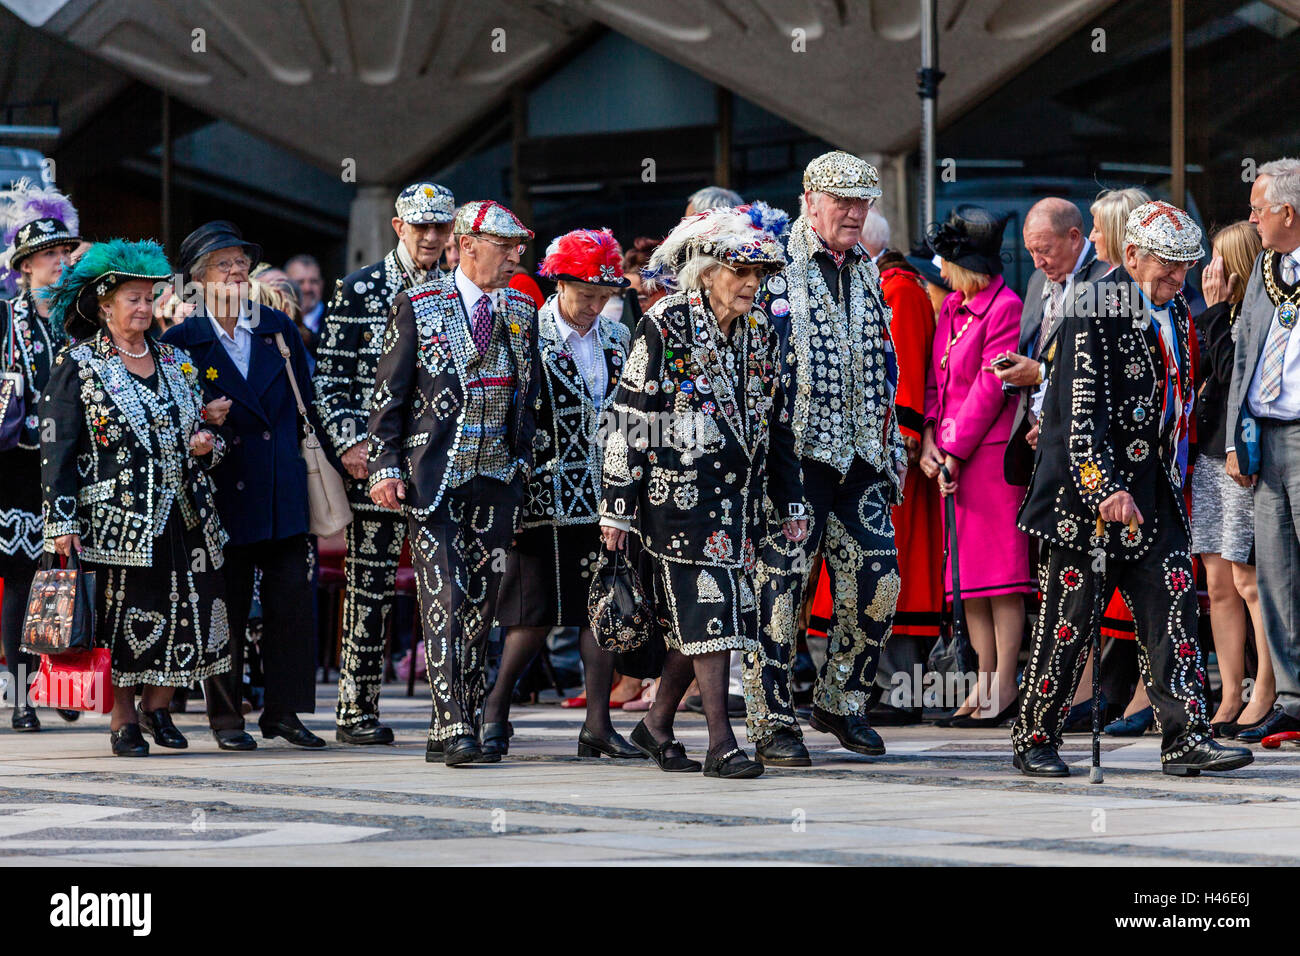 Pearly Kings and Queens Parade Around The Guildhall Yard During The Annual Pearly Kings and Queens' Harvest Festival, London, UK Stock Photo